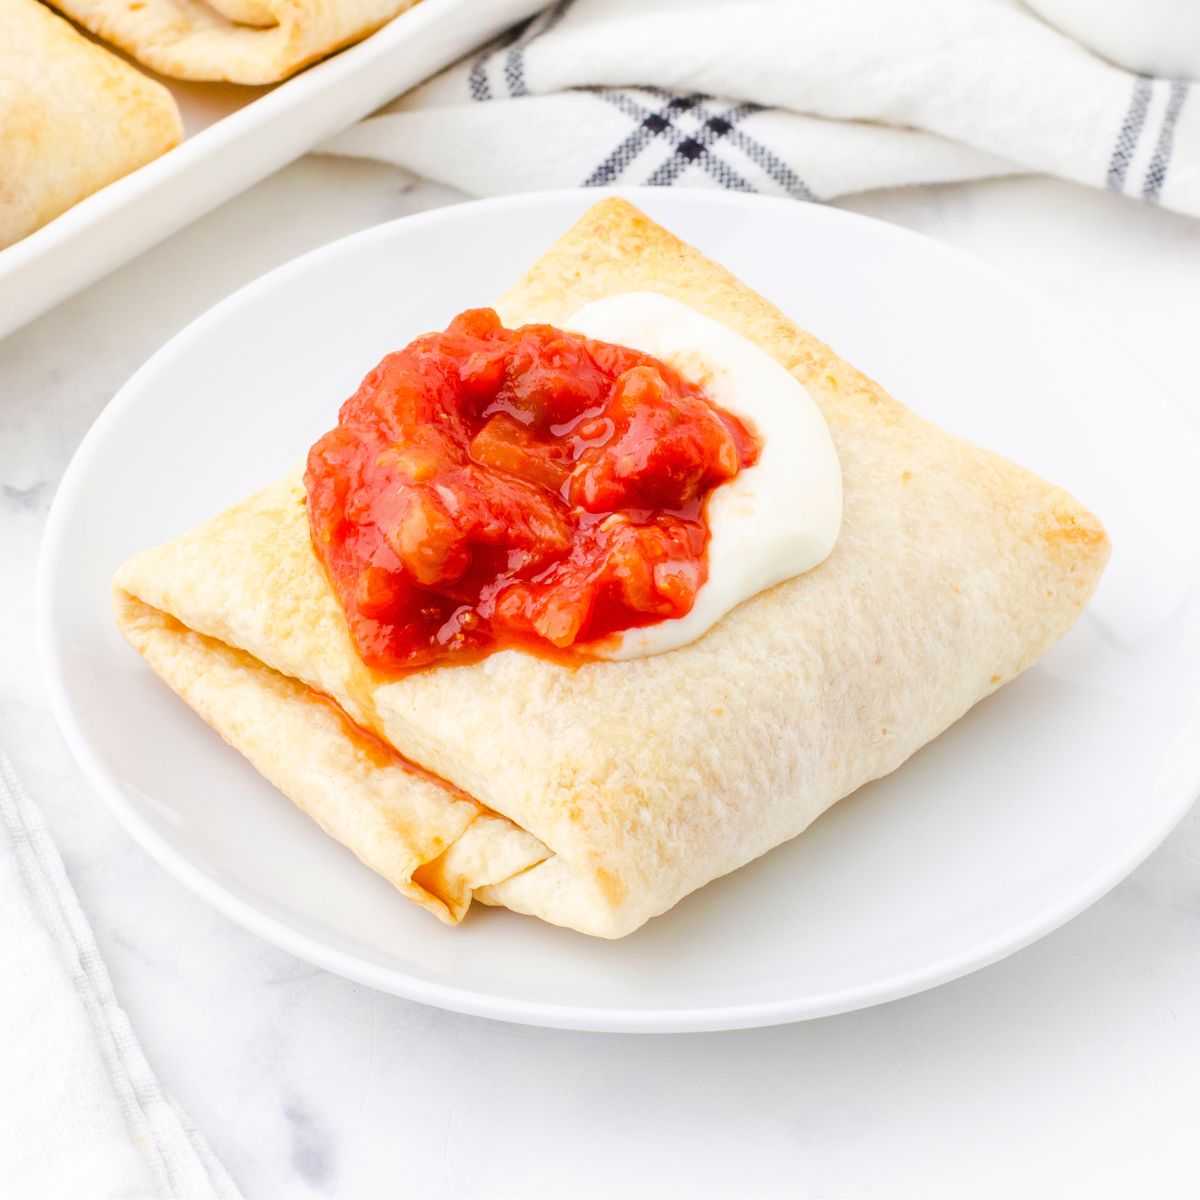 Baked Chicken Chimichangas Recipe